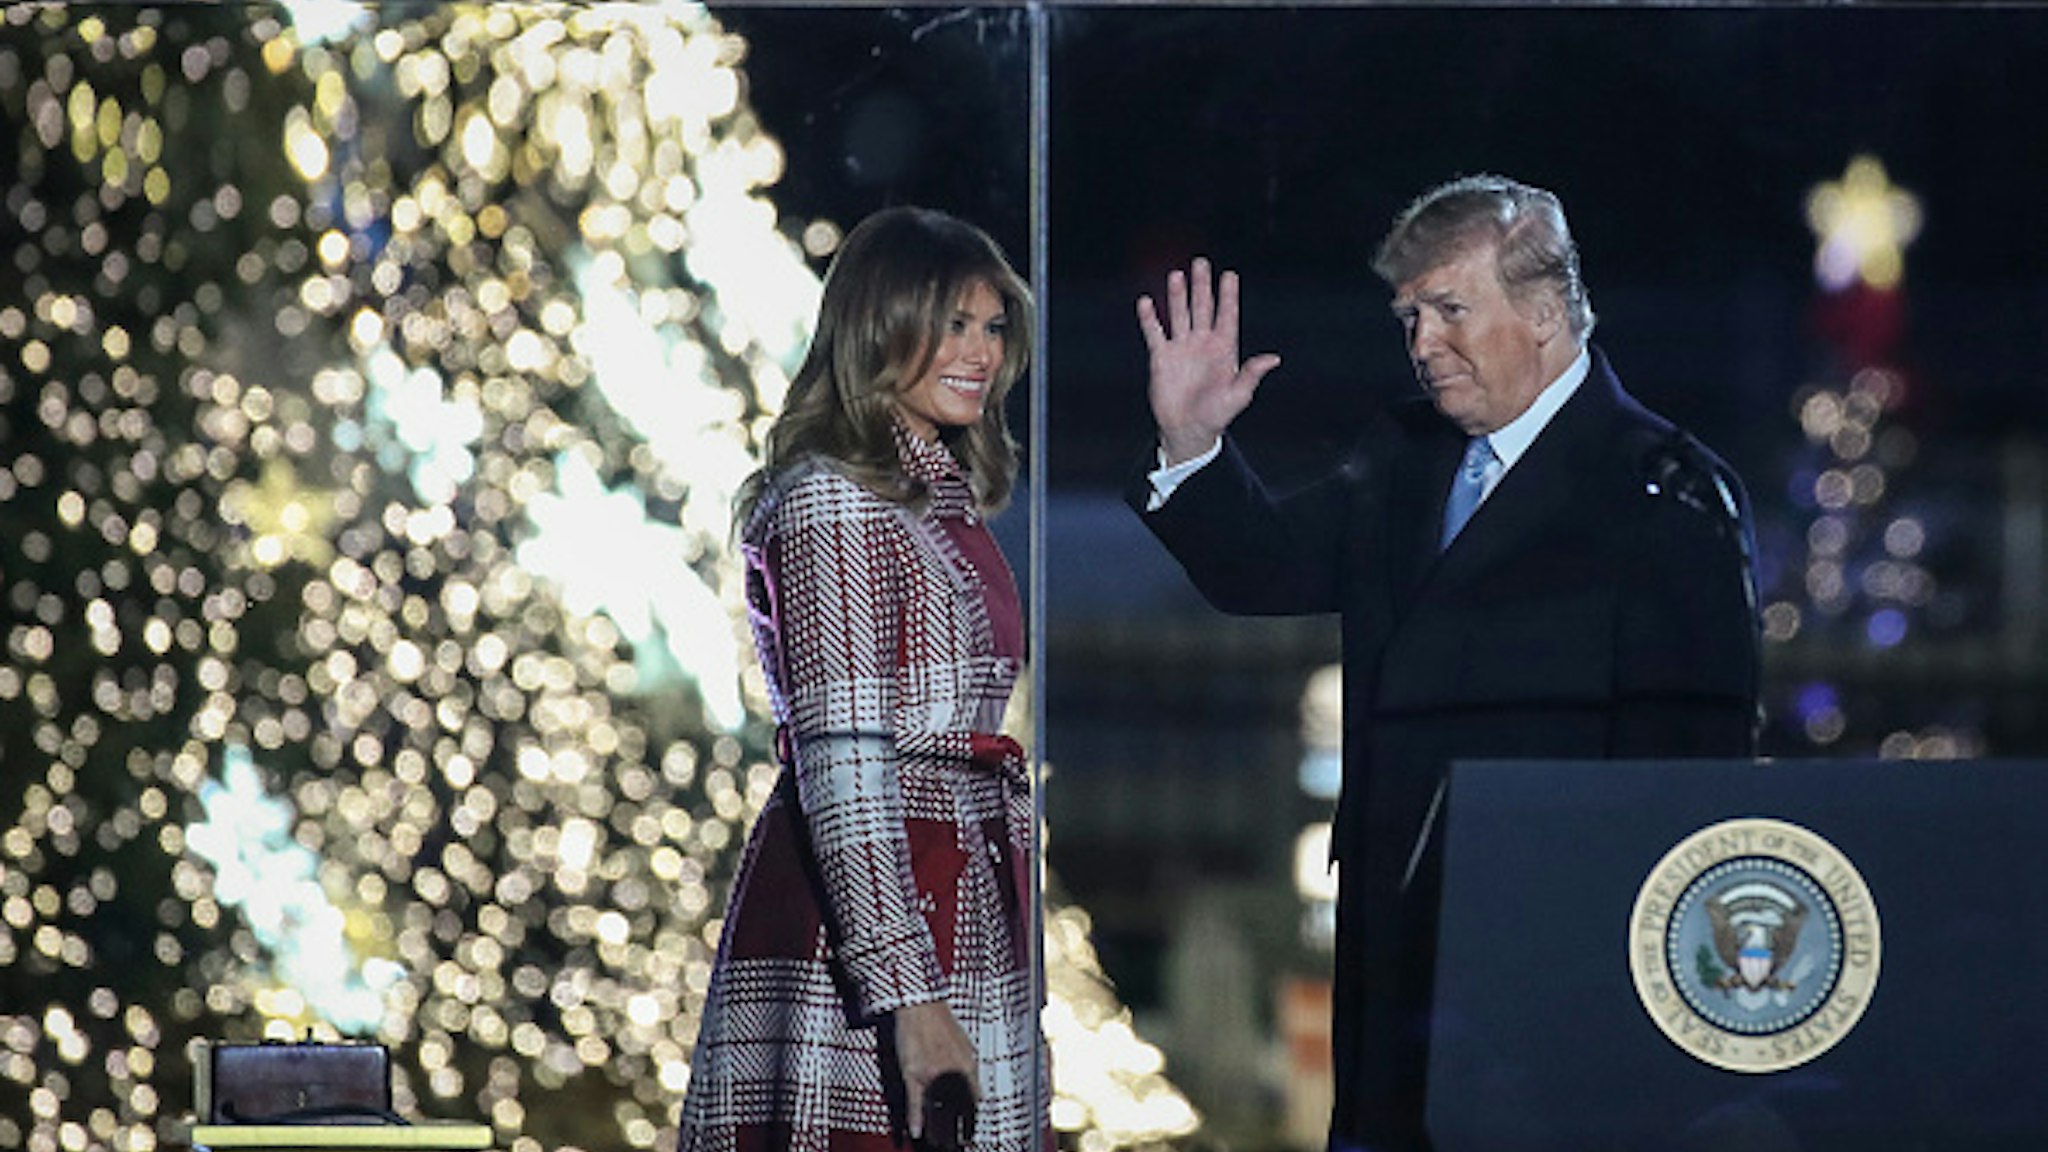 WASHINGTON, DC - DECEMBER 5: U.S. President Donald Trump and first lady Melania Trump attend the National Christmas Tree lighting ceremony held by the National Park Service at the Ellipse near the White House, on December 5, 2019 in Washington, DC. This year's National Christmas Tree is a 30-foot Colorado blue spruce from Pennsylvania and is adorned with 50,000 lights and 450 stars.